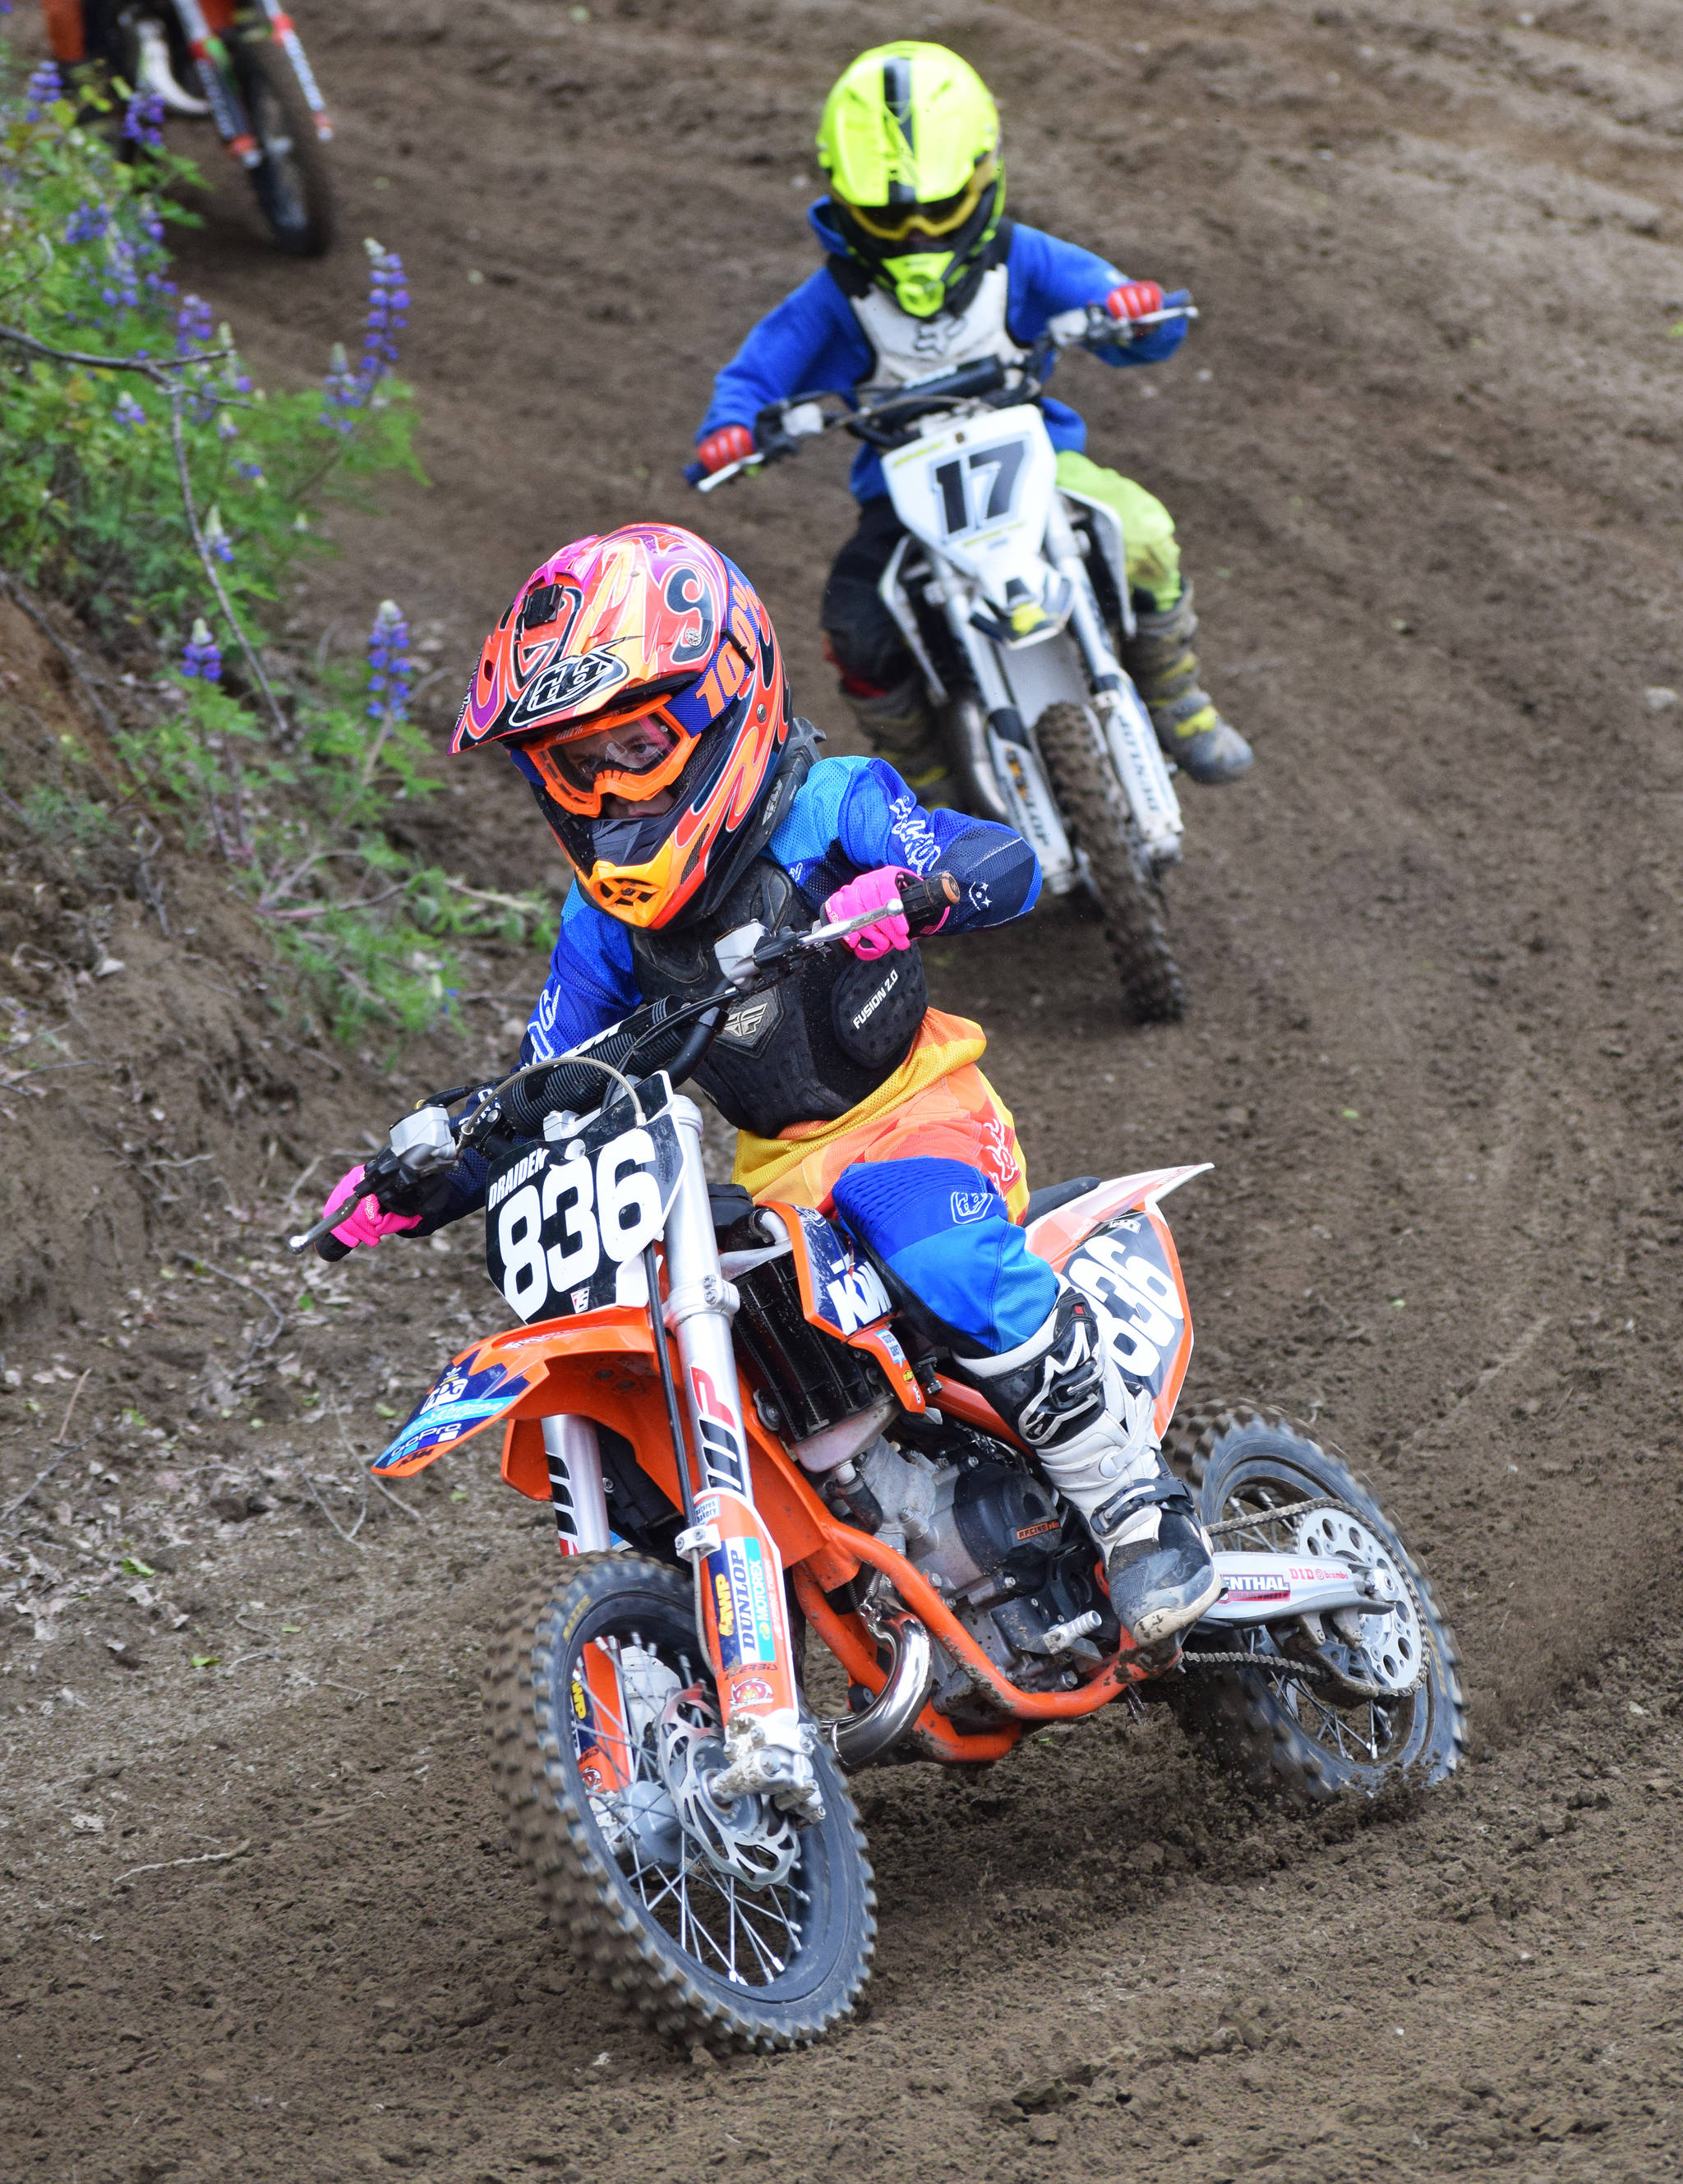 Draiden Mullican (836) leads a group of riders in the 65cc class Saturday, June 15, 2019, at the Alaska State Motocross Championships at Twin City Raceway’s motocross track in Kenai, Alaska. (Photo by Joey Klecka/Peninsula Clarion)